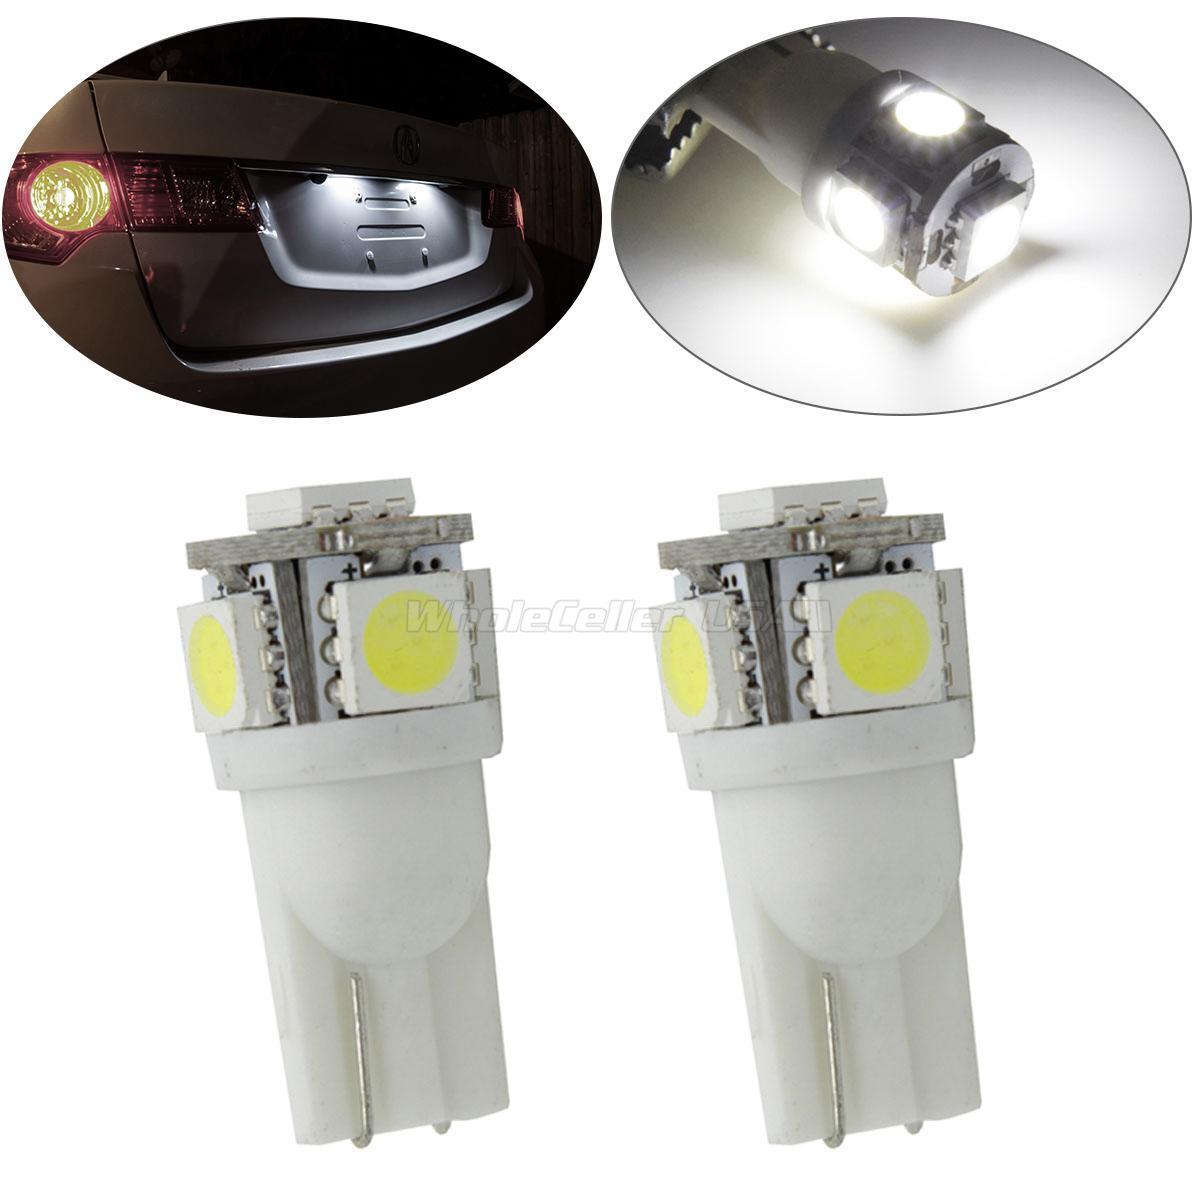 2x HID White 5 5050 SMD T10 168 194 2825 LED Bulb Lamps For License Plate Lights